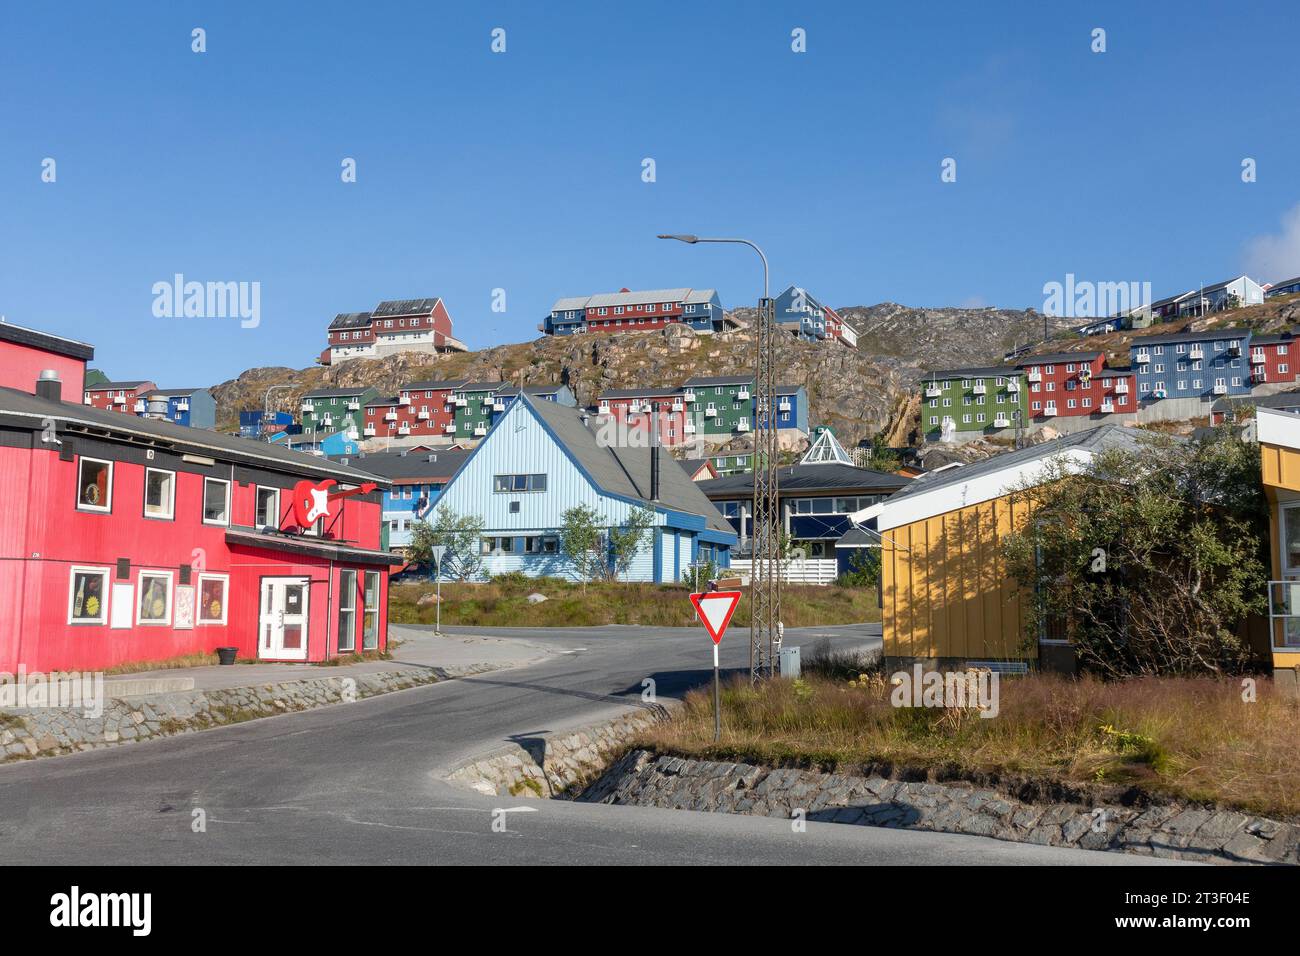 Traditional Colourful Greenland House On A Hill In The Town Of Qaqortoq Greenland, In The Early Morning Stock Photo